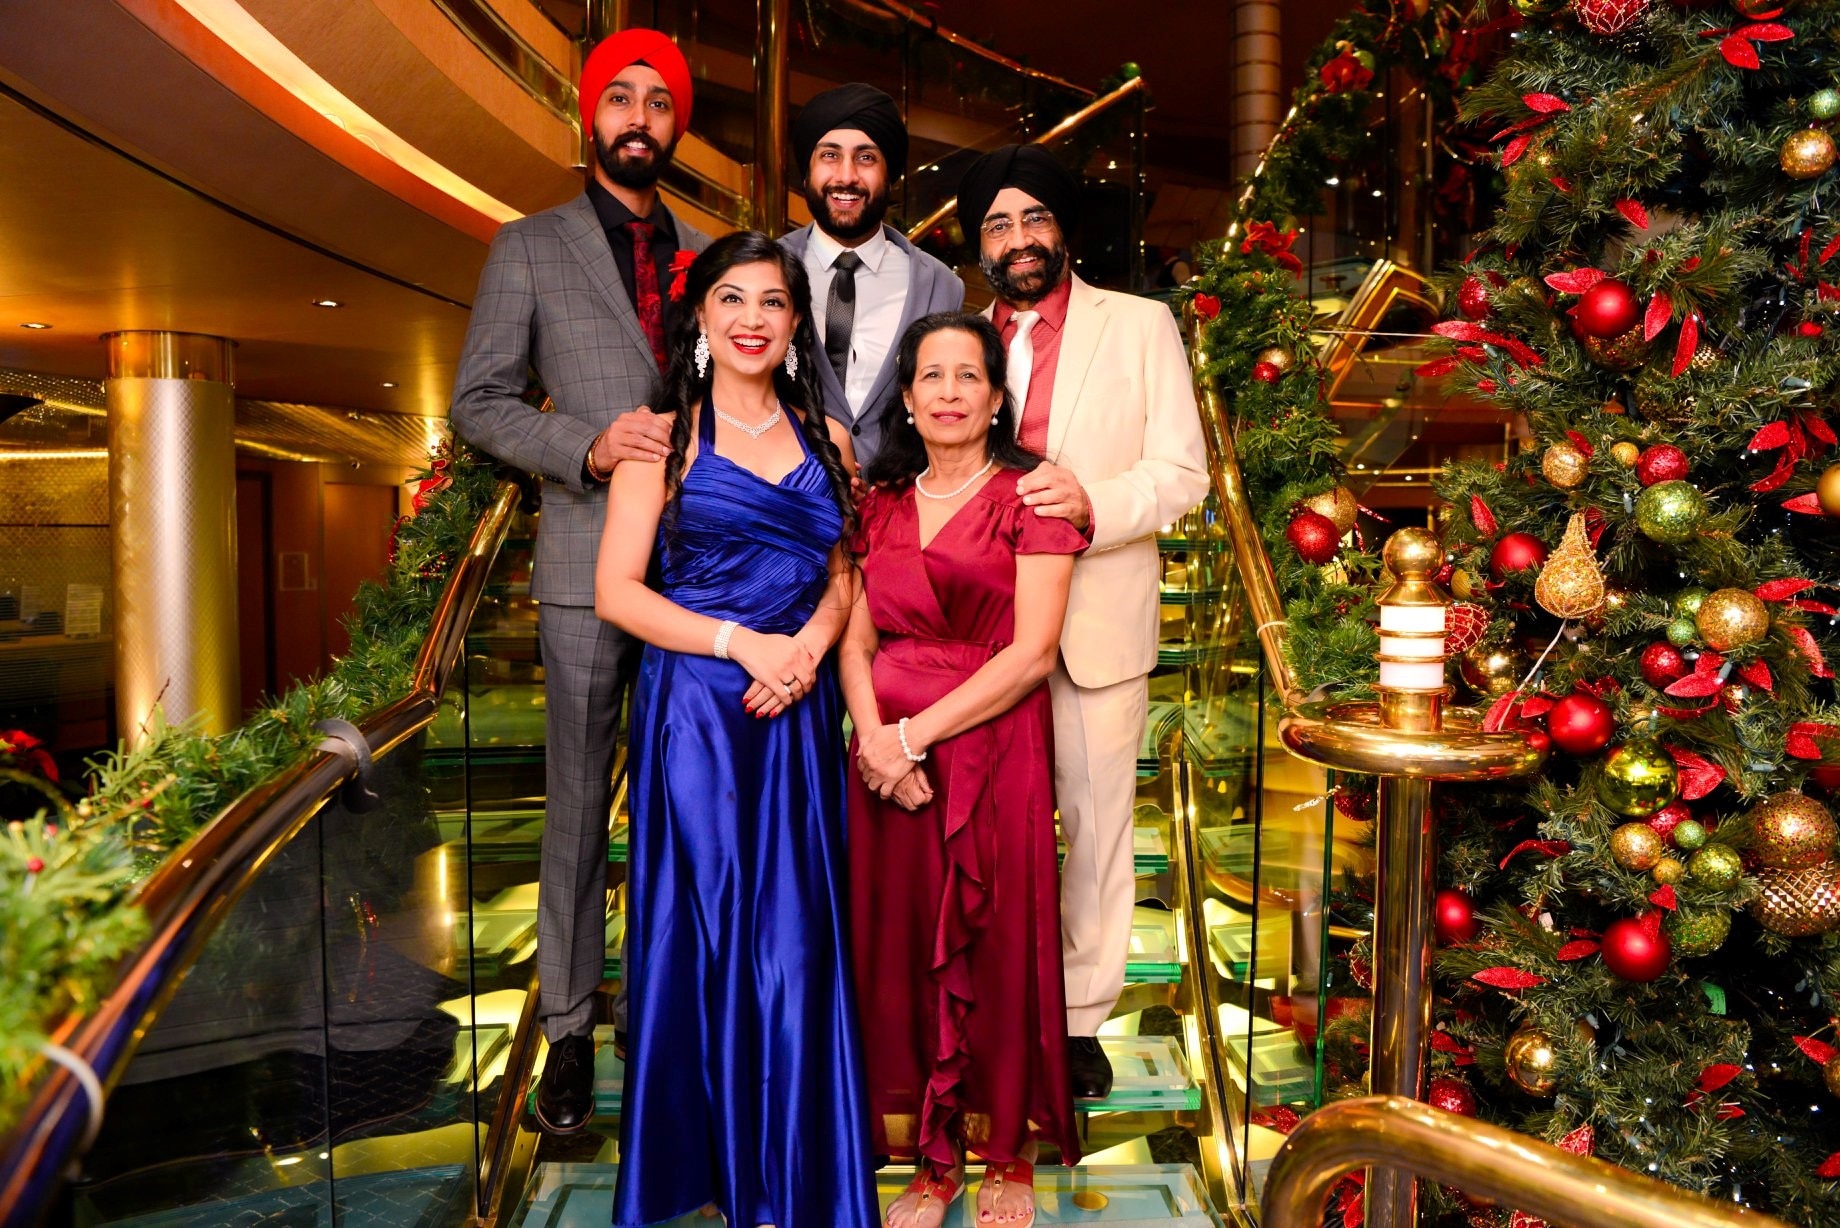 The Dhingra family is based in Sydney. They moved to Australia from India about 25 years ago.